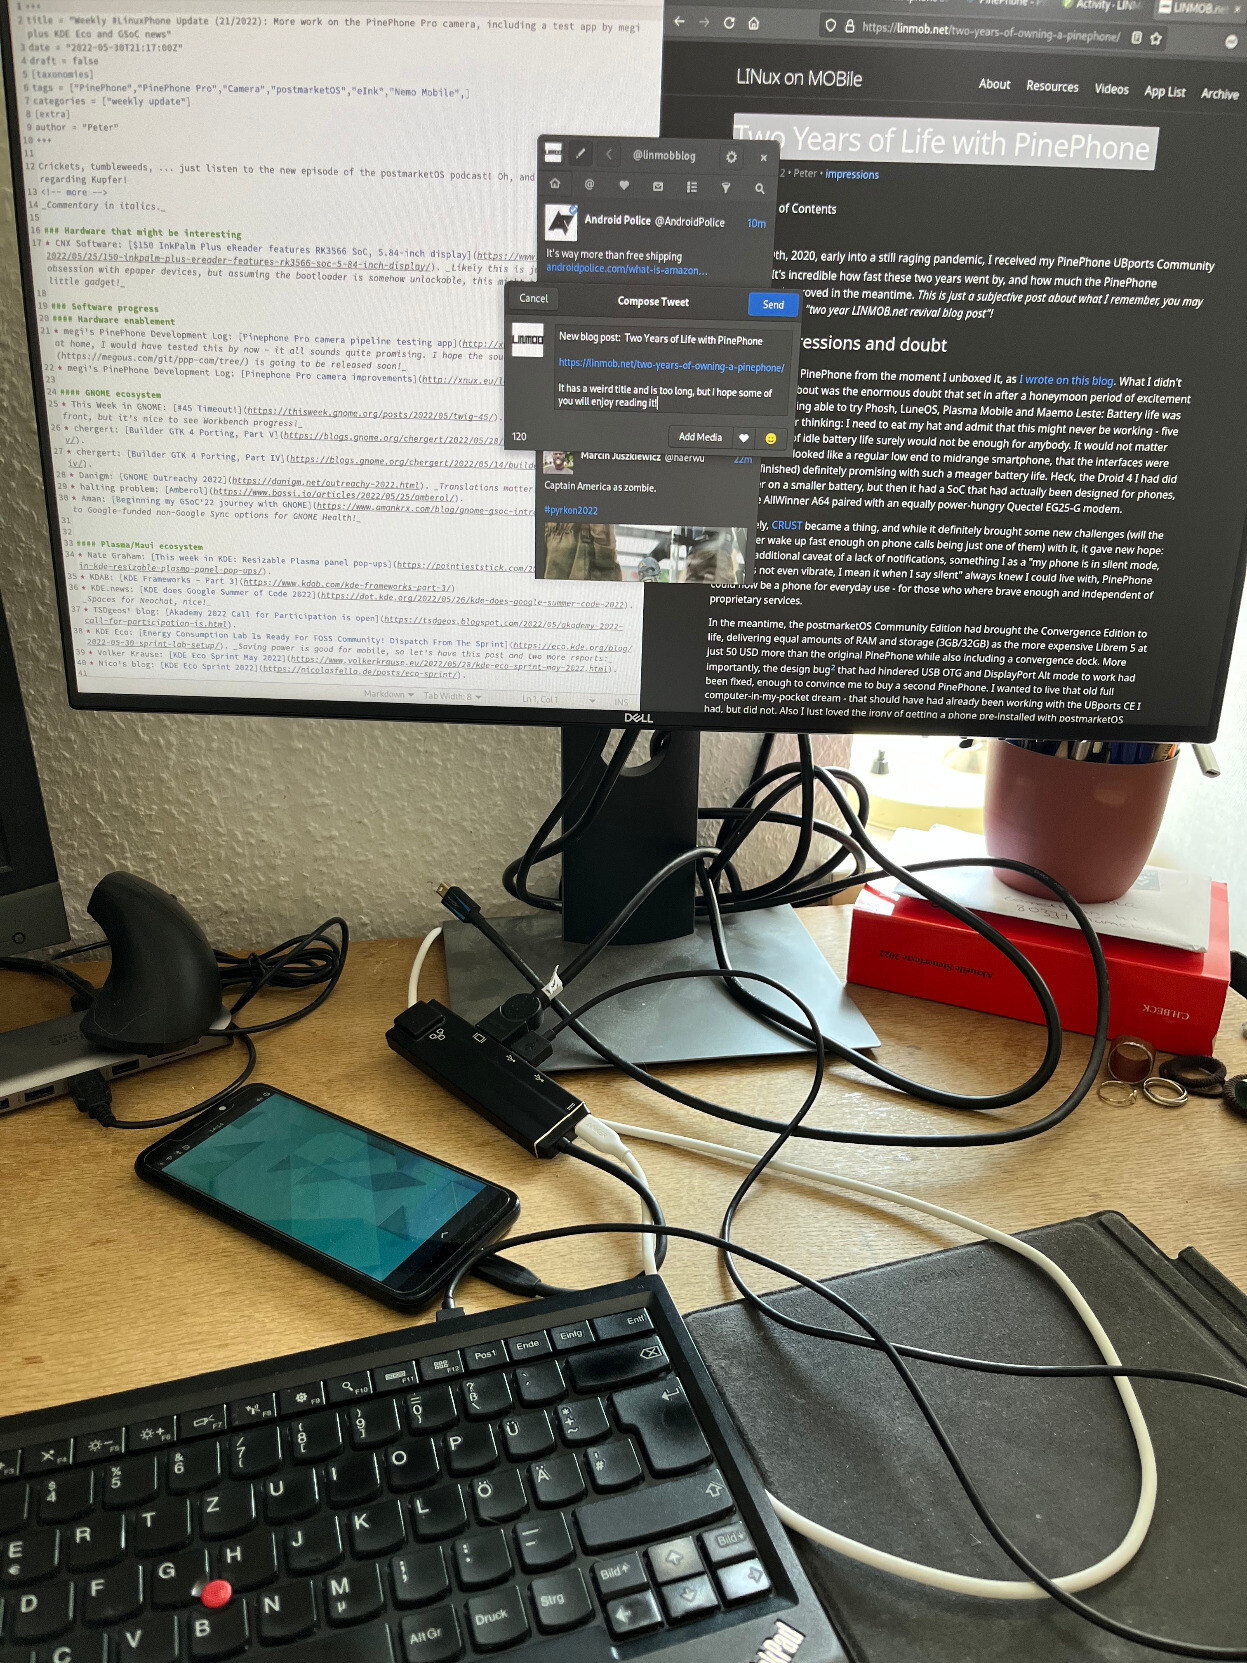 A PinePhone, connected to a monitor and a keyboard with track point, displaying a draft of a tweet to announce the same blog post on Twitter